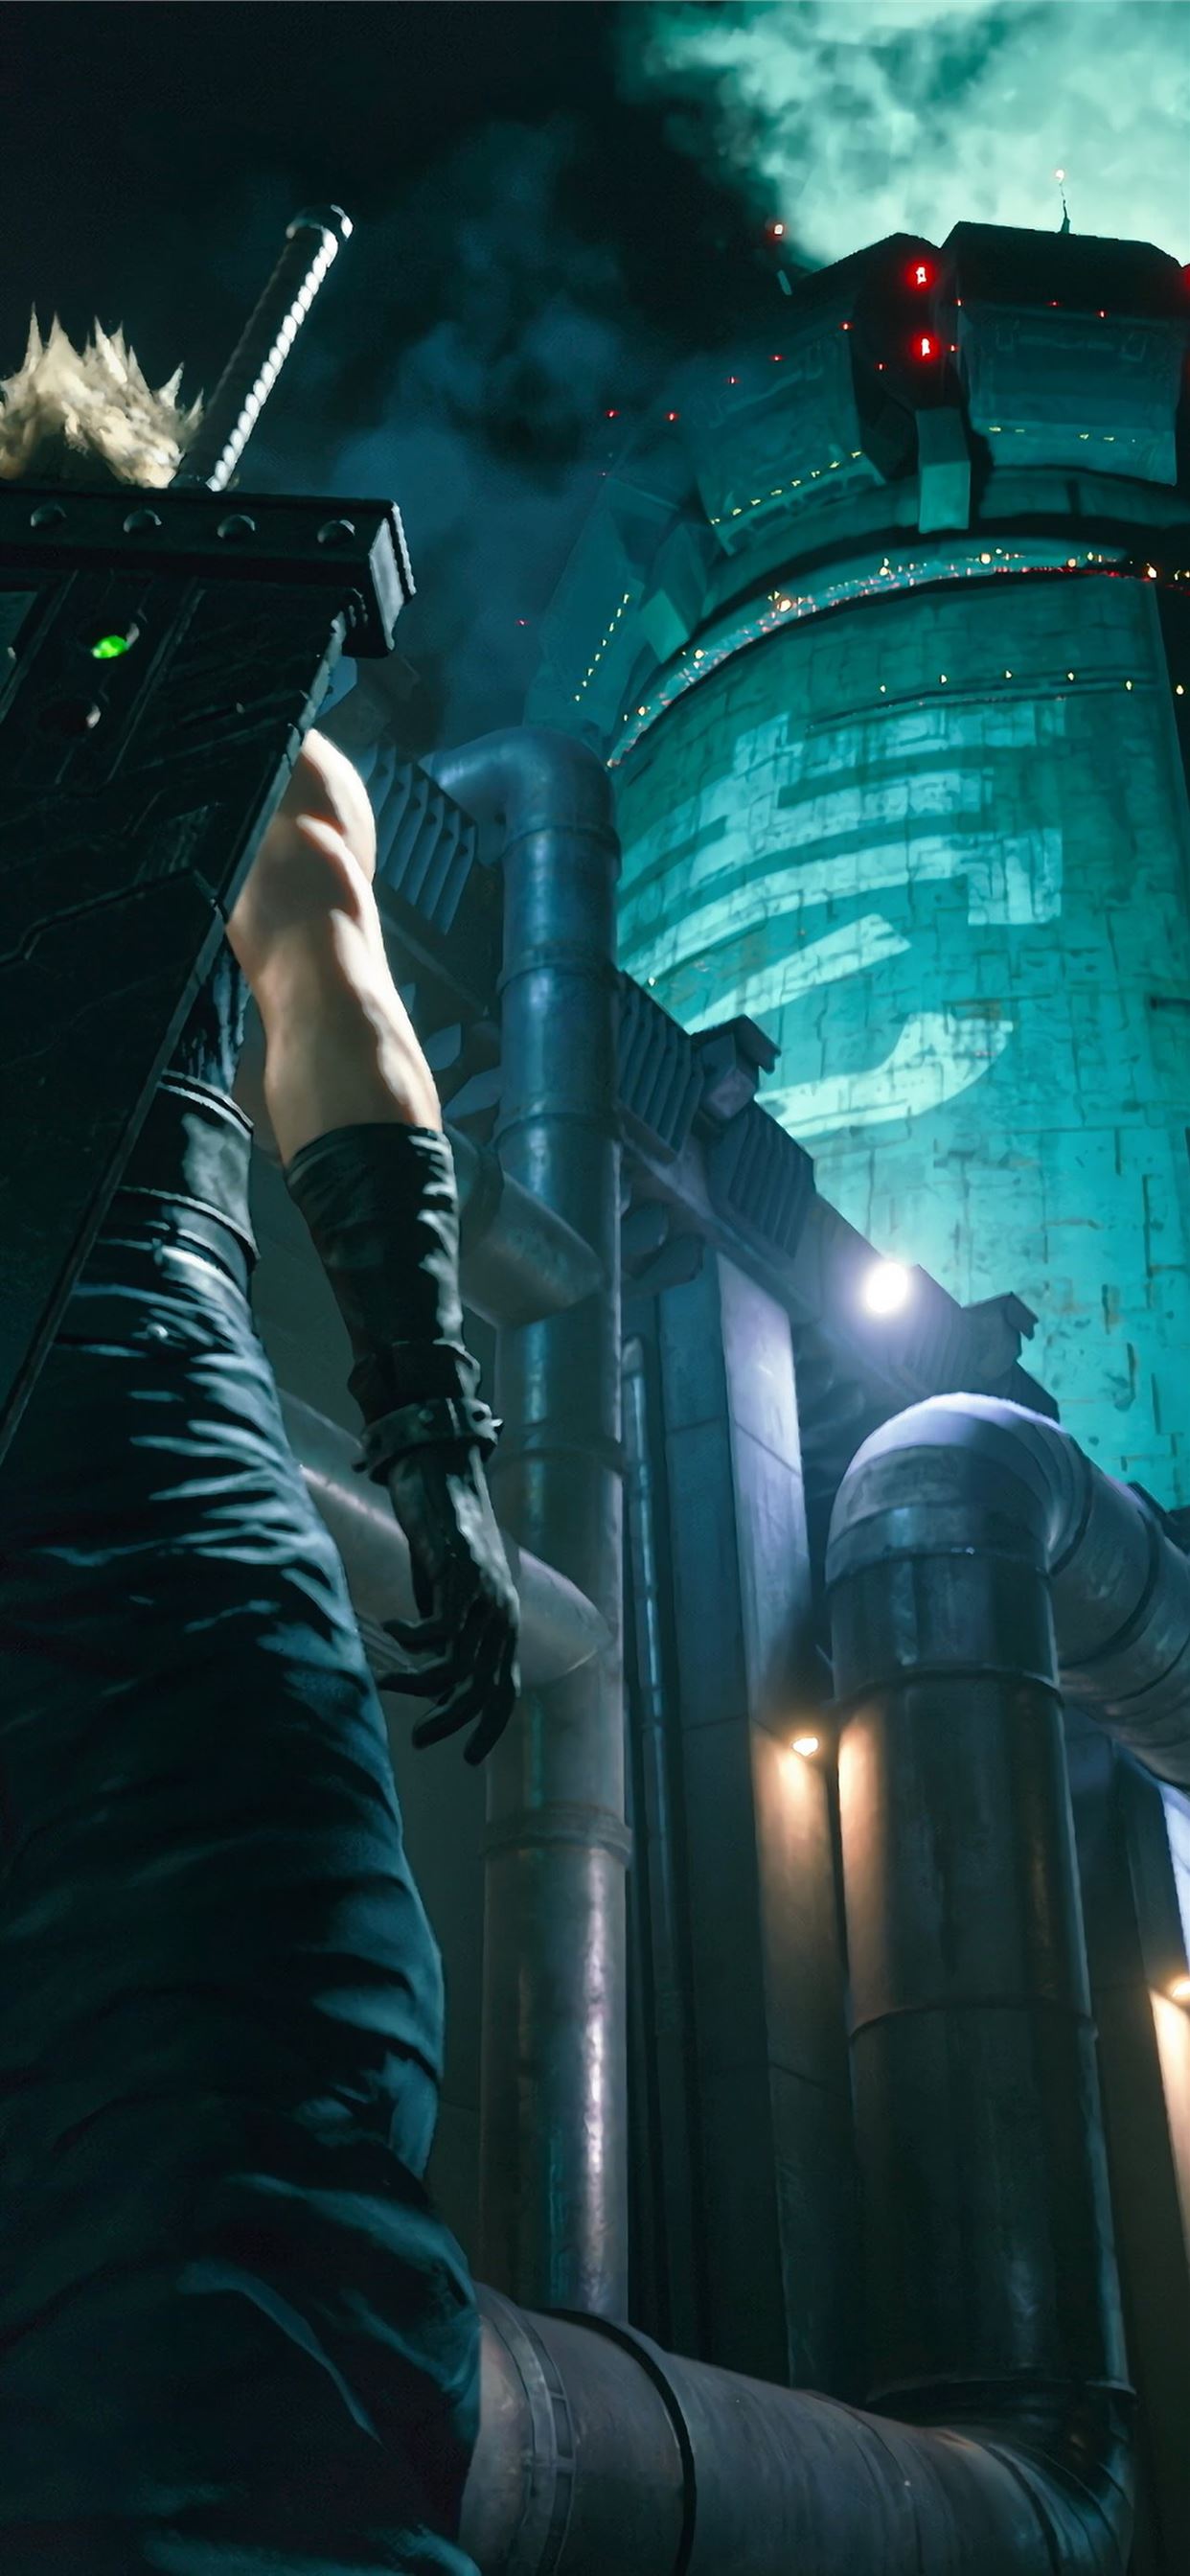 final fantasy vii iPhone Wallpapers Free Download